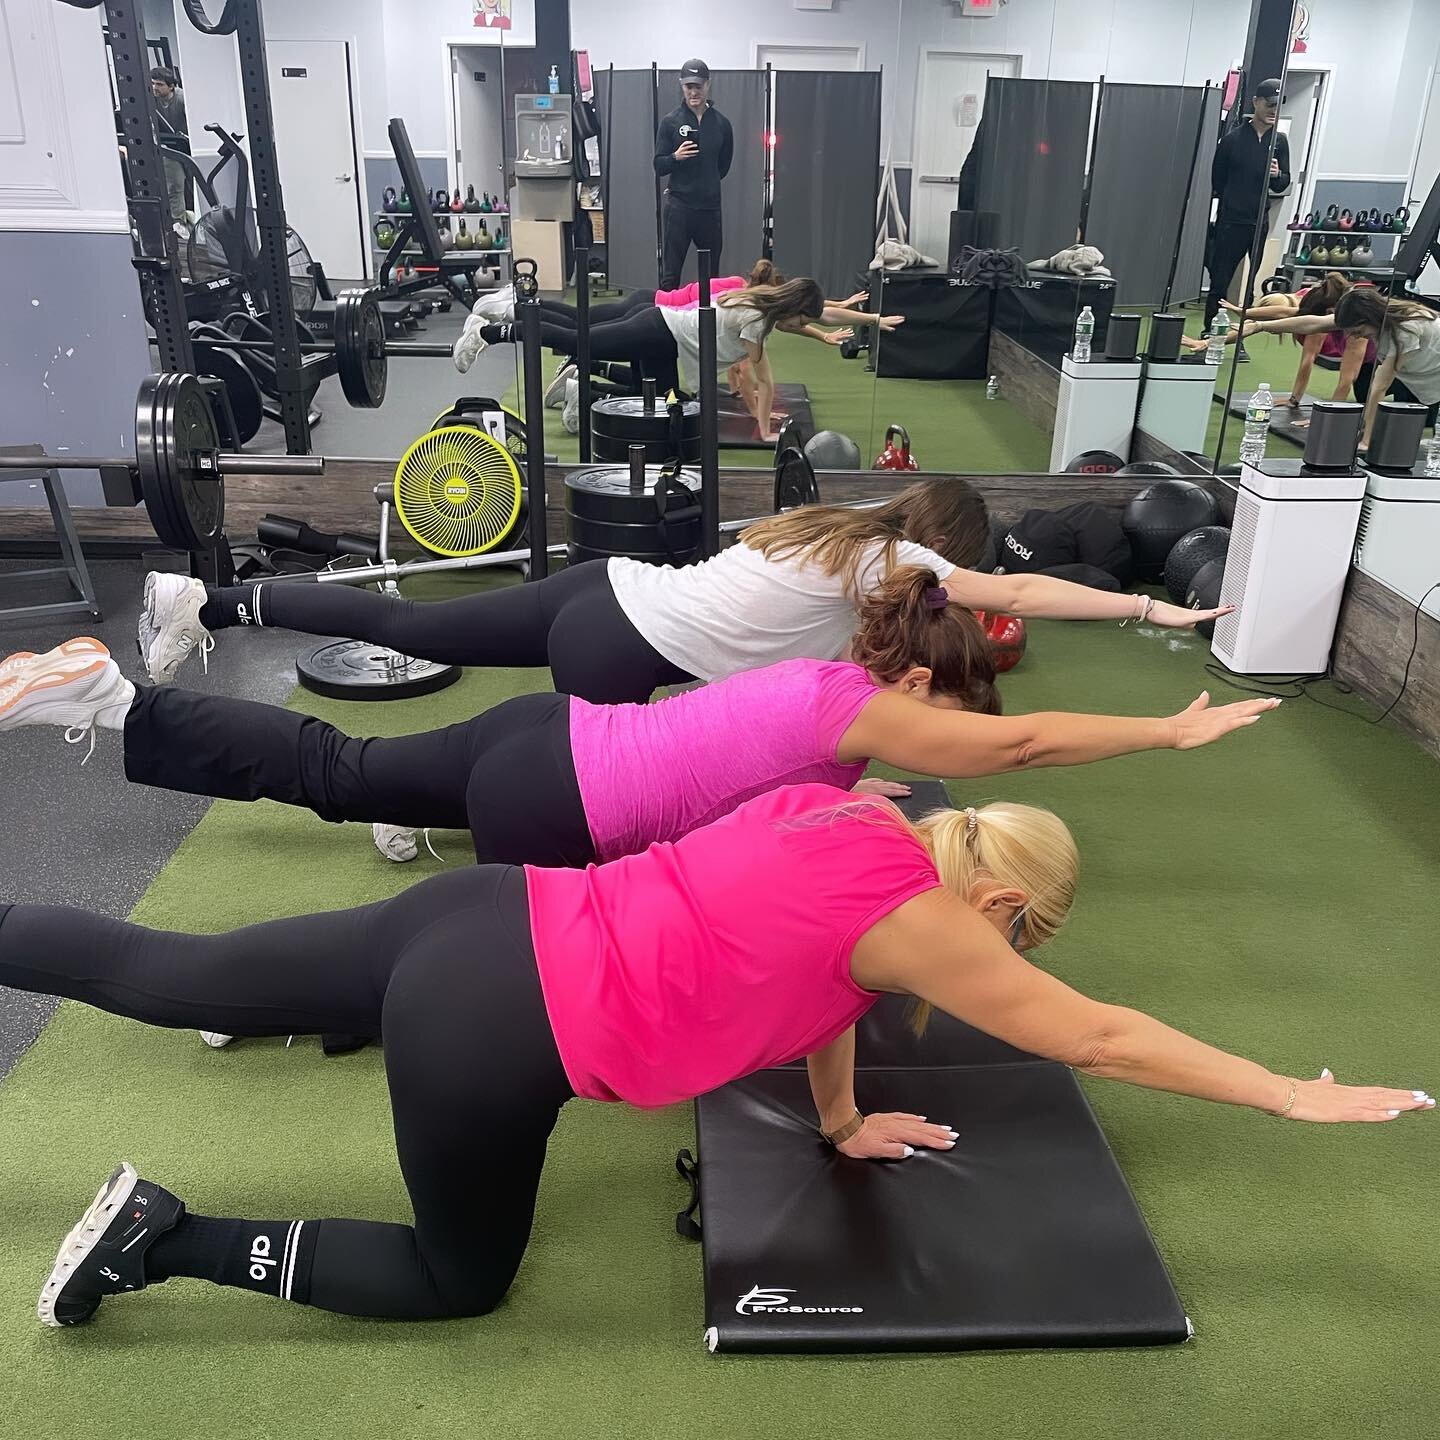 Friends that train together stay together 💁🏼&zwj;♀️💁🏻&zwj;♀️💁🏼&zwj;♀️

#personaltrainer #training #fitness #gym #weightloss #muscle #abs #diet #athletes #whitestone #flushing #bayside #queens #portwashington #manhasset #roslyn #longisland #nyc 